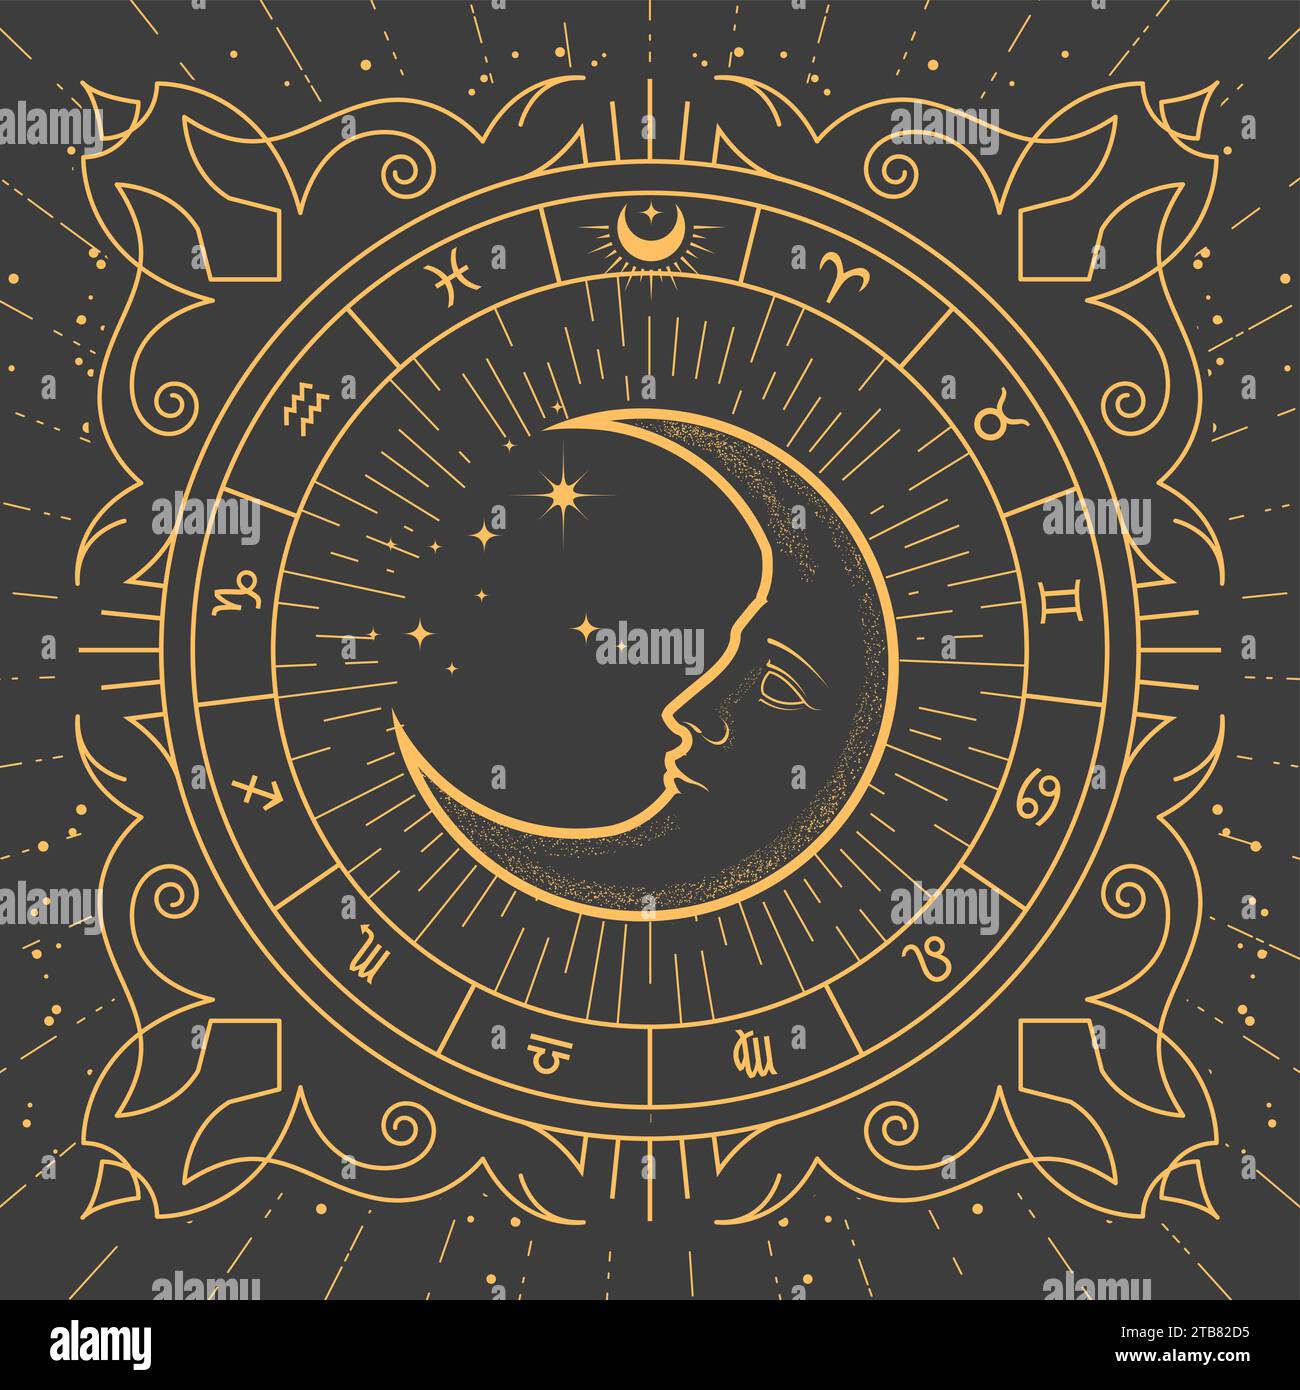 Half-moon inside ornamental frame, magic crescent in tarot style, zodiac signs and esoteric patterns, astrology mystic frame, vector Stock Vector